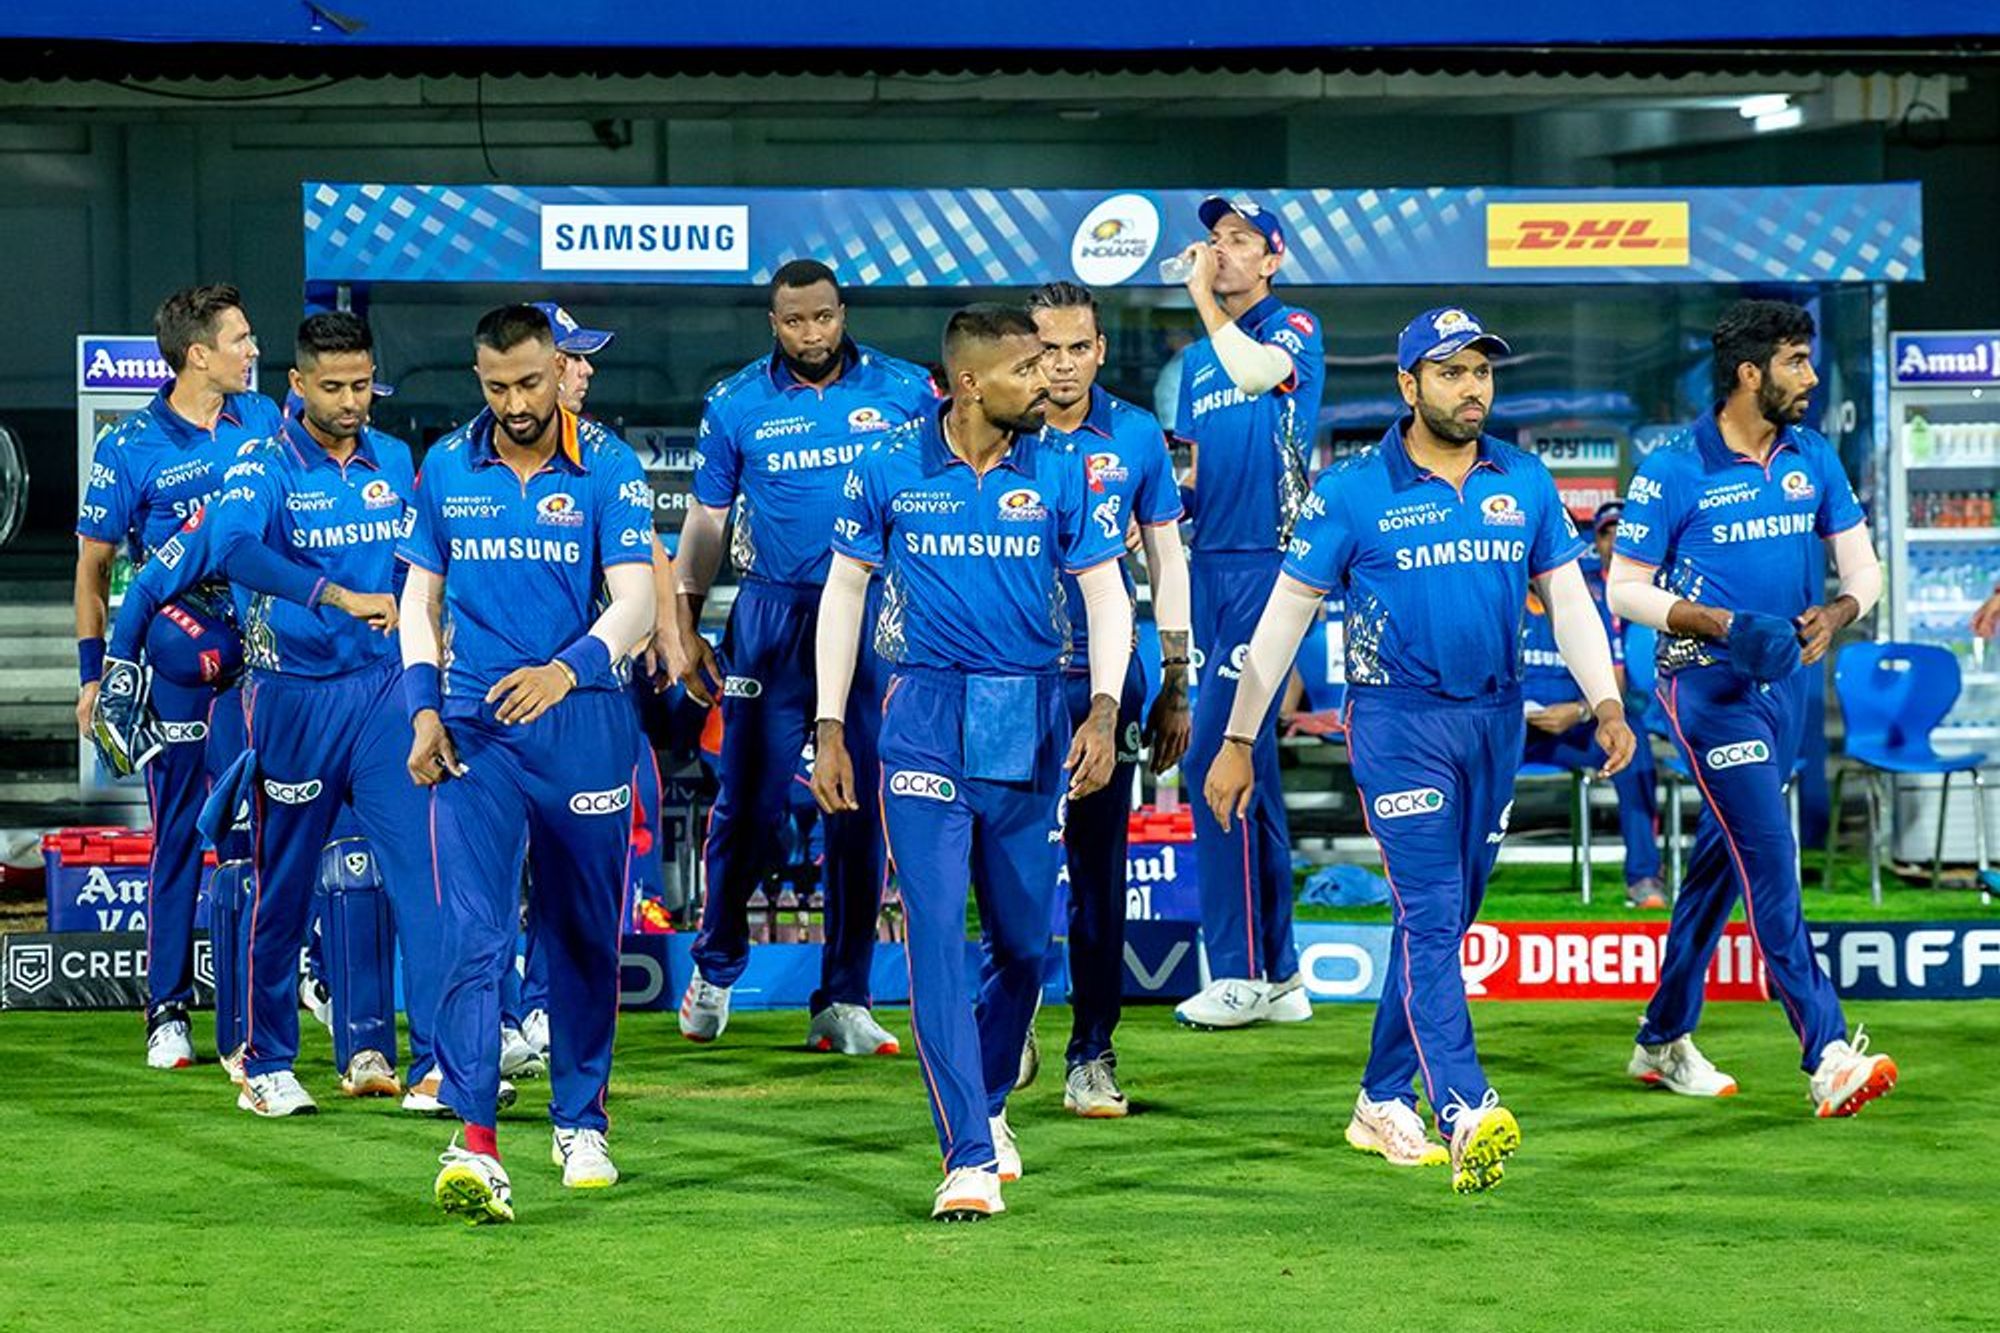 Mumbai will look to bounce back after defeat to RCB | BCCI/IPL